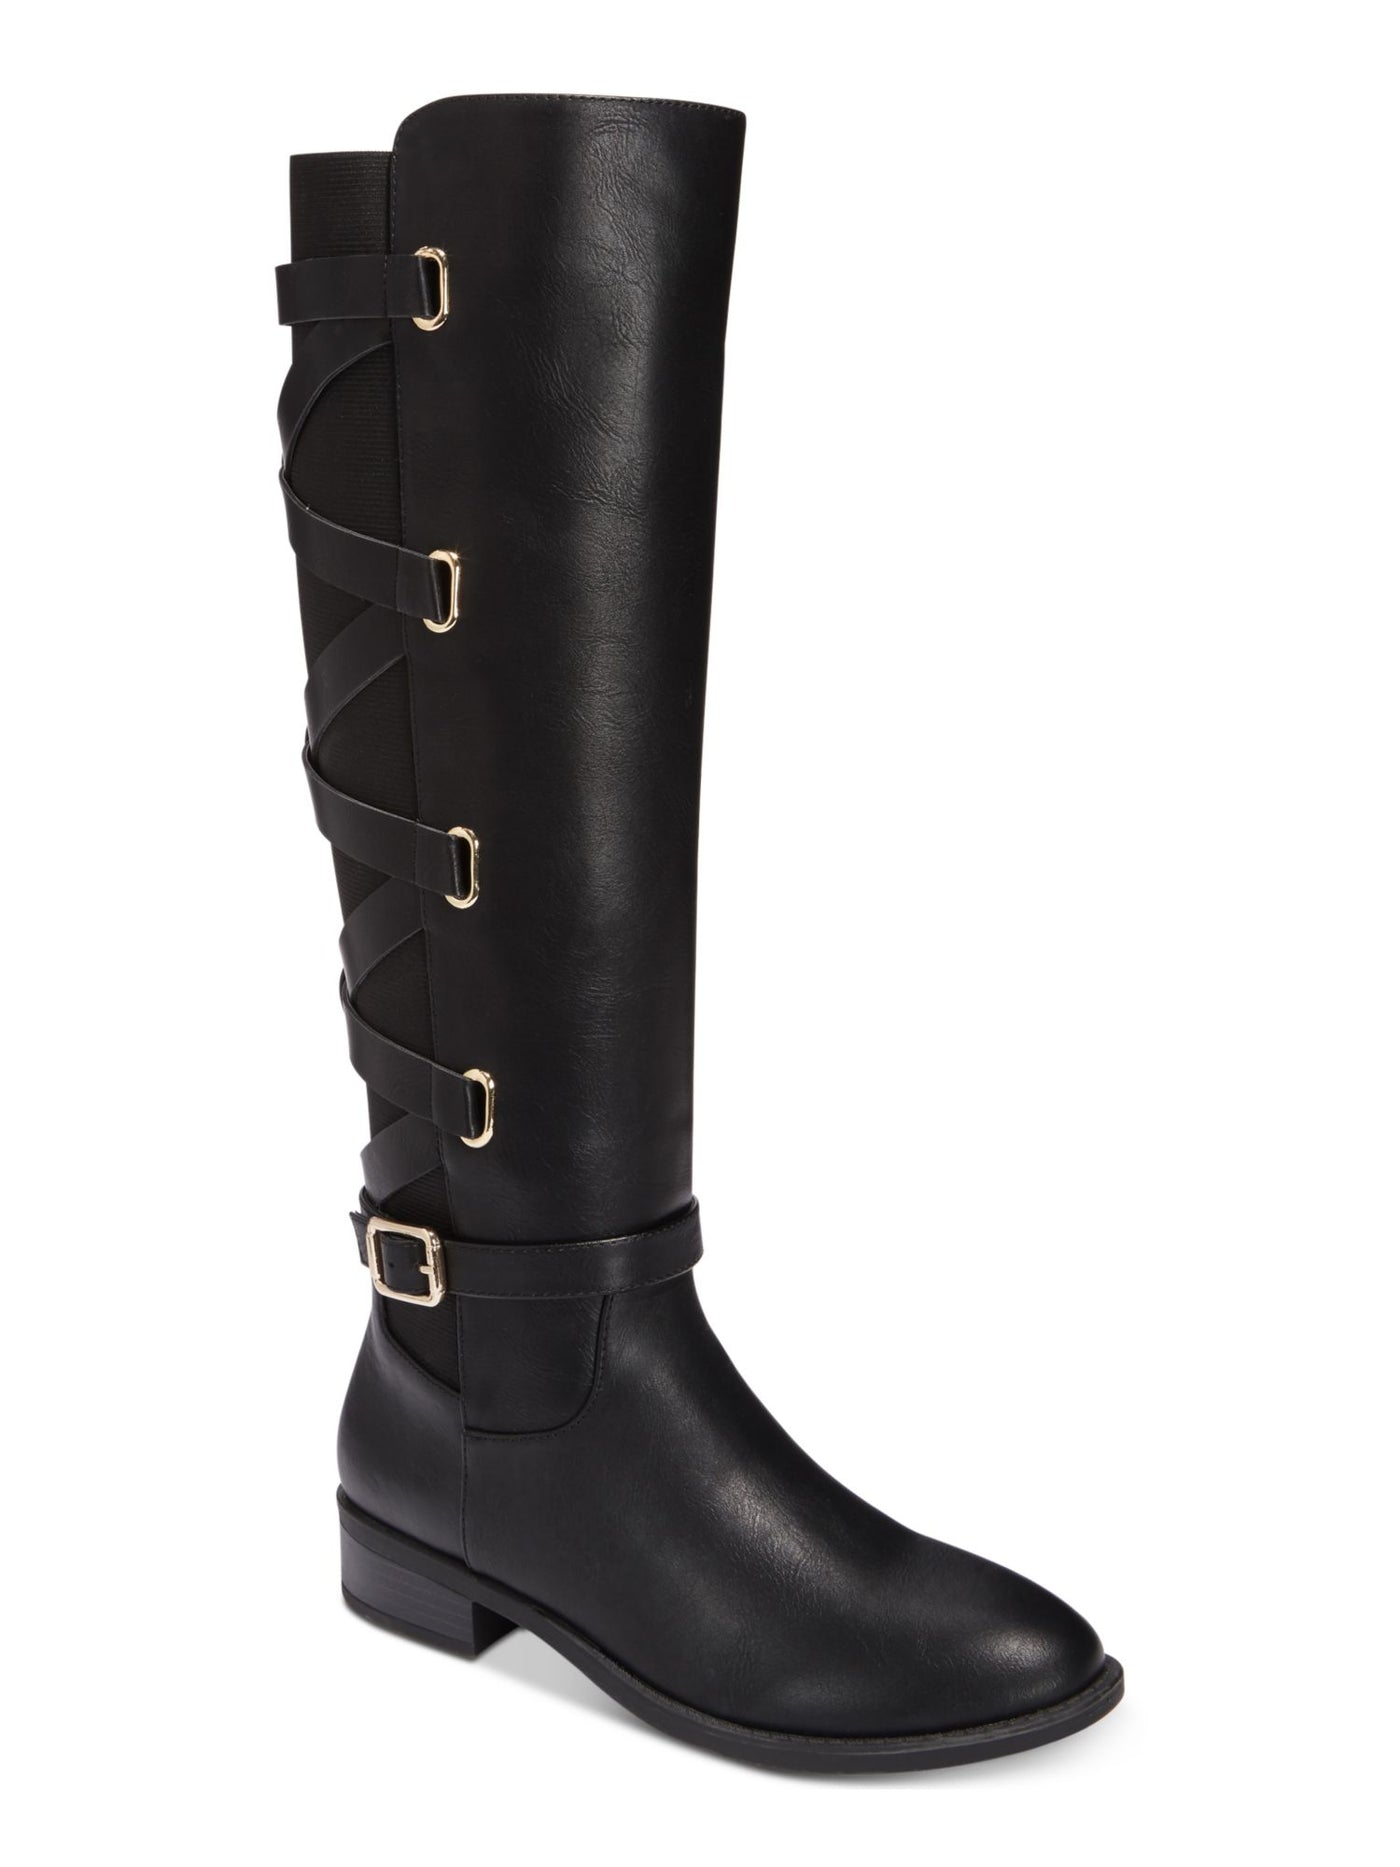 THALIA SODI Womens Black Criss-Cross Straps At Back Buckle Accent Stretch Round Toe Stacked Heel Zip-Up Boots Shoes 6